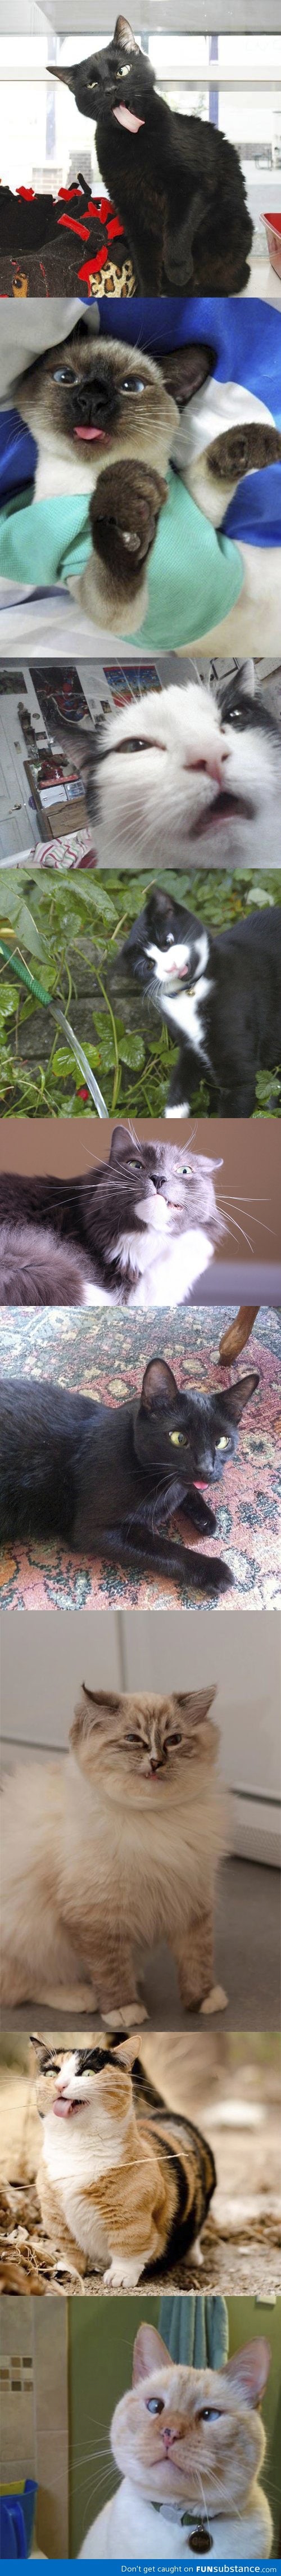 Derpy cats